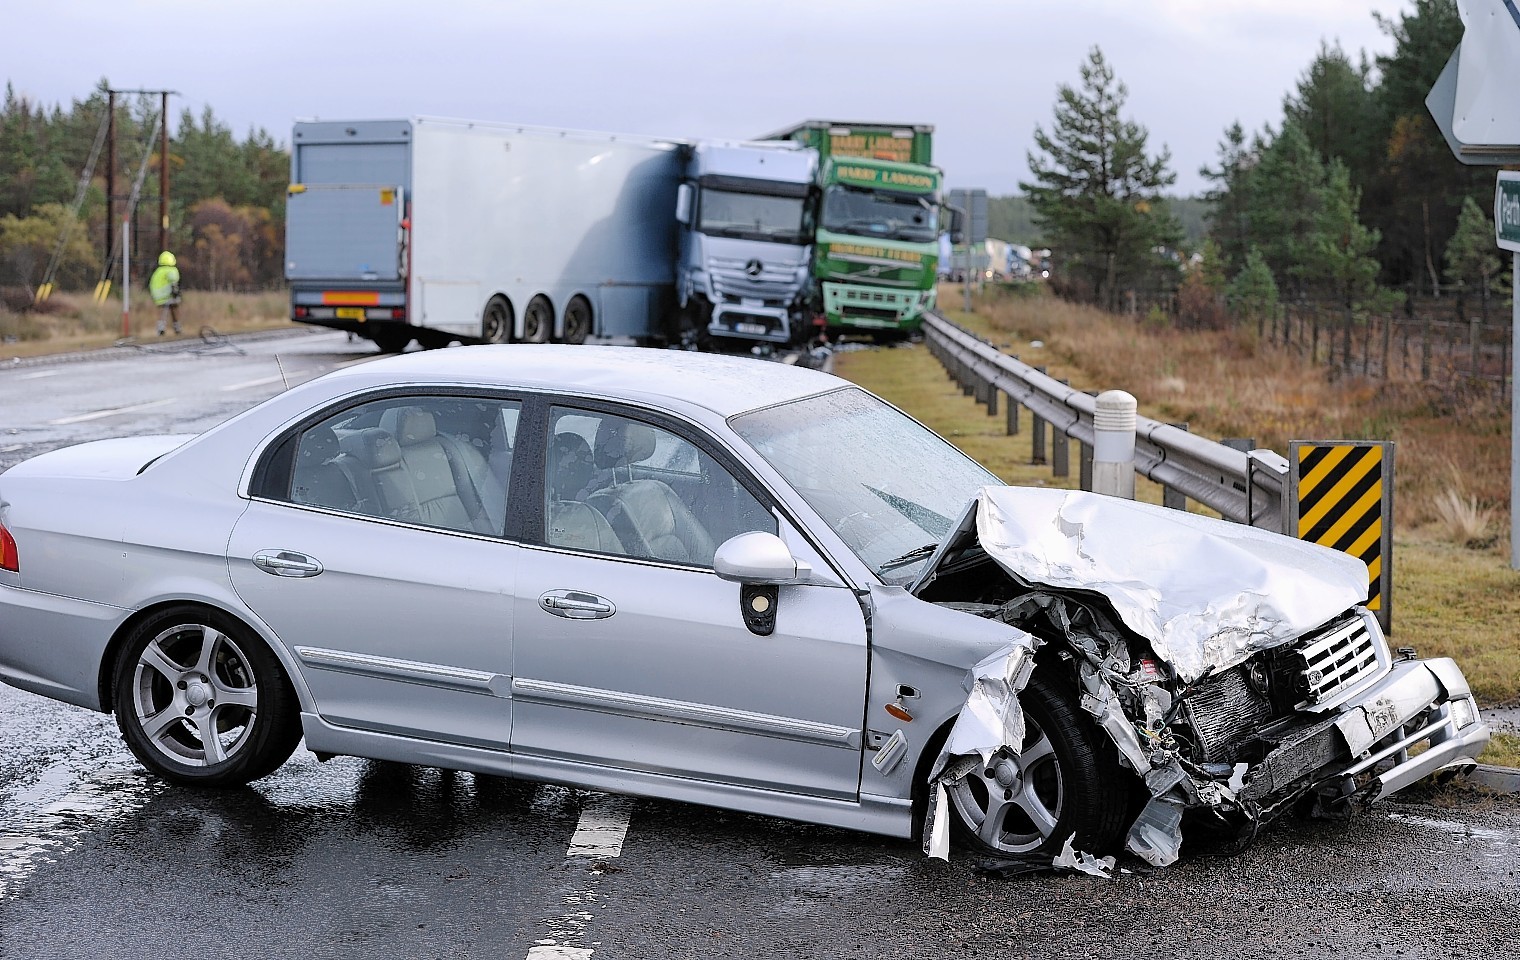 The crash on the A9 at Carrbridge